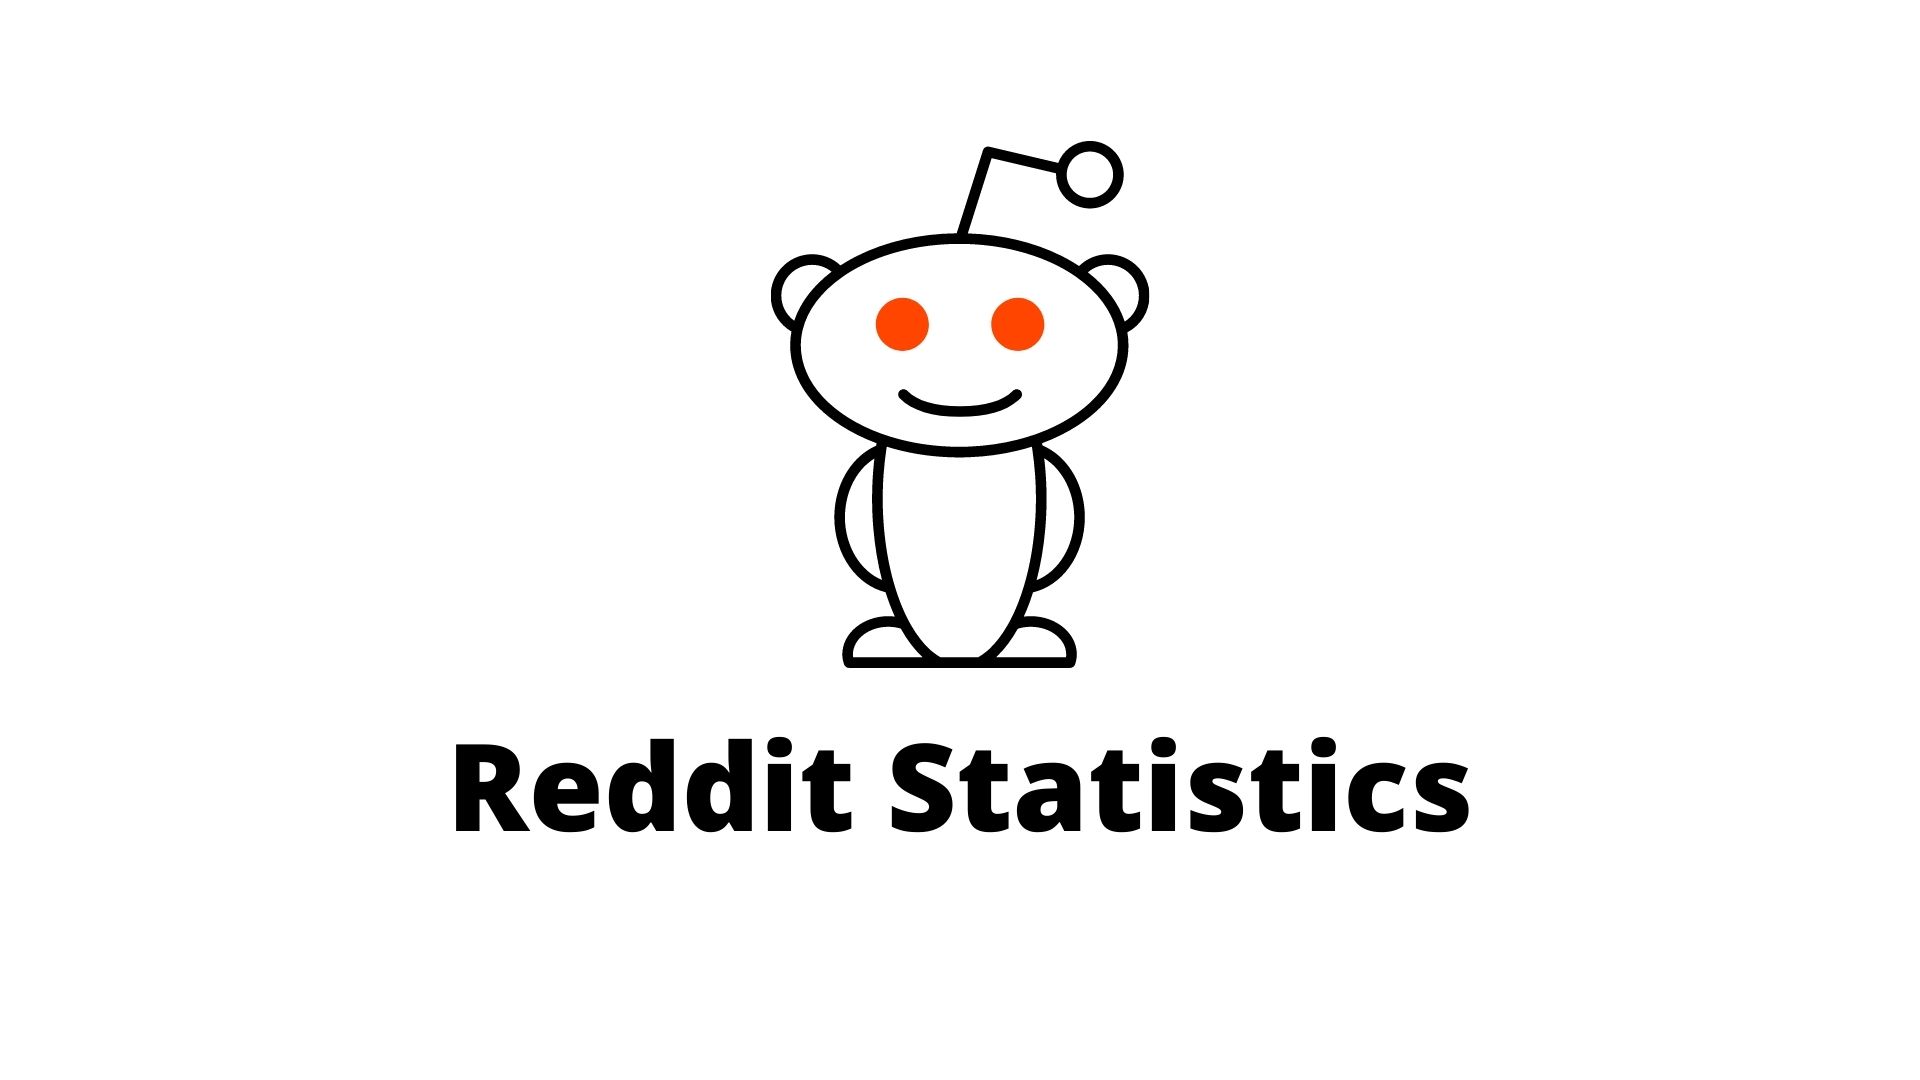 40+ Mind-Blowing Reddit Statistics That Will Blow Your Mind in 2022